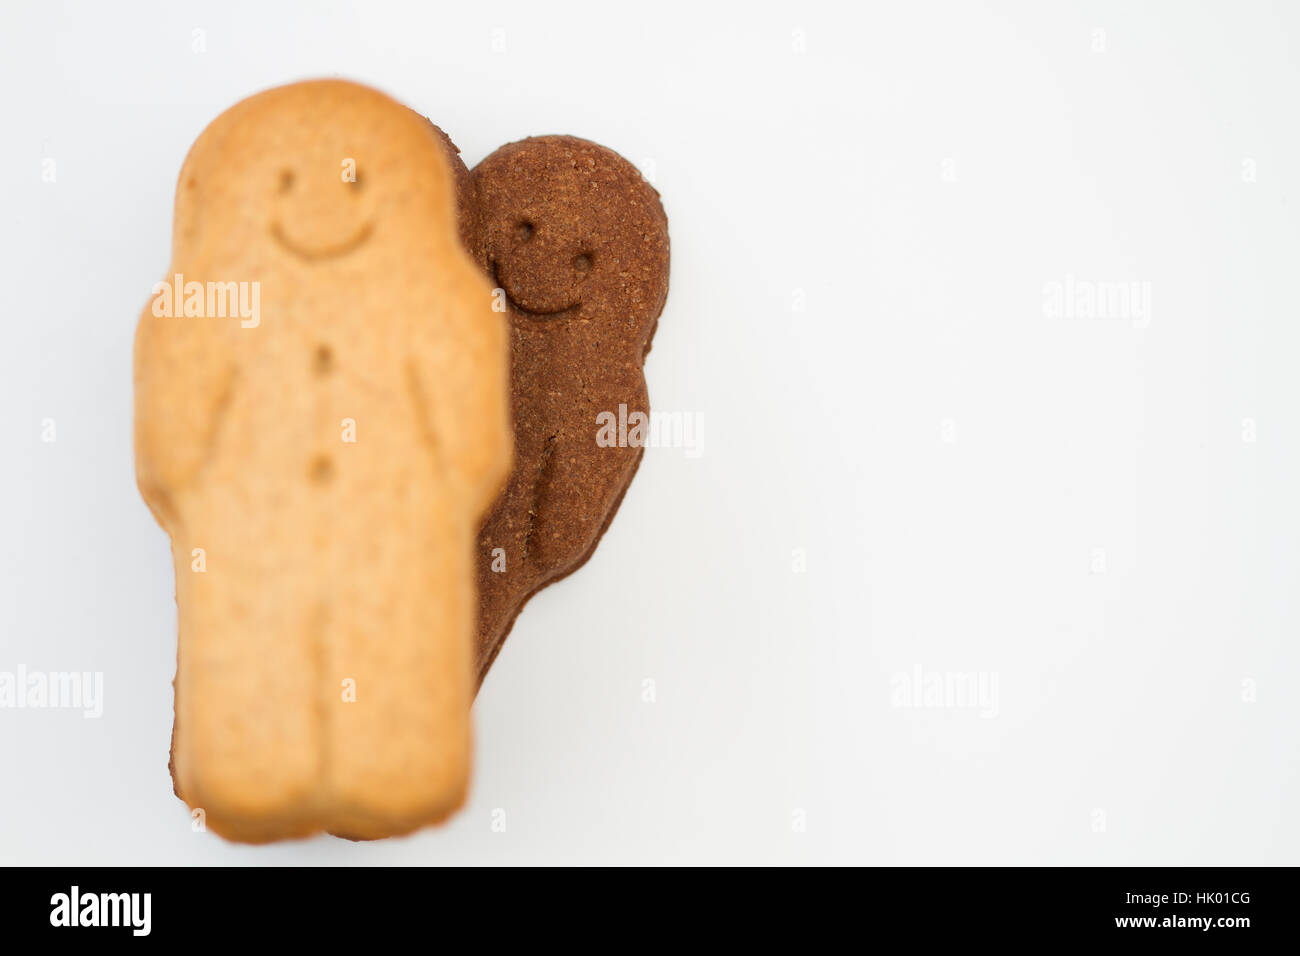 A cheeky black gingerbread man peeking over the shoulder of a white gingerbread man and having fun on a white background. Stock Photo